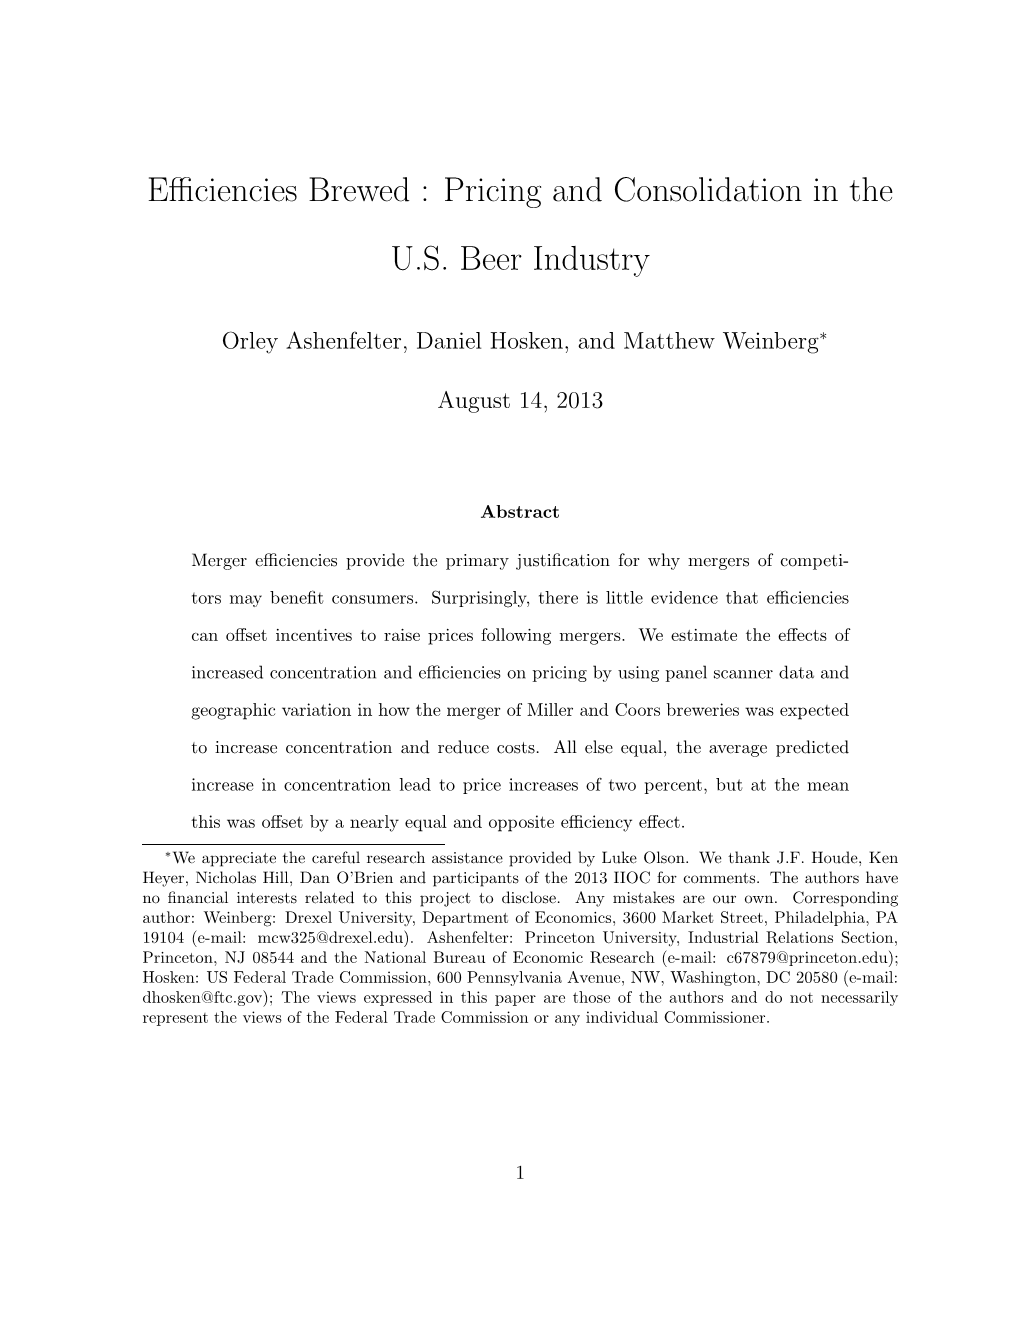 Efficiencies Brewed : Pricing and Consolidation in the U.S. Beer Industry